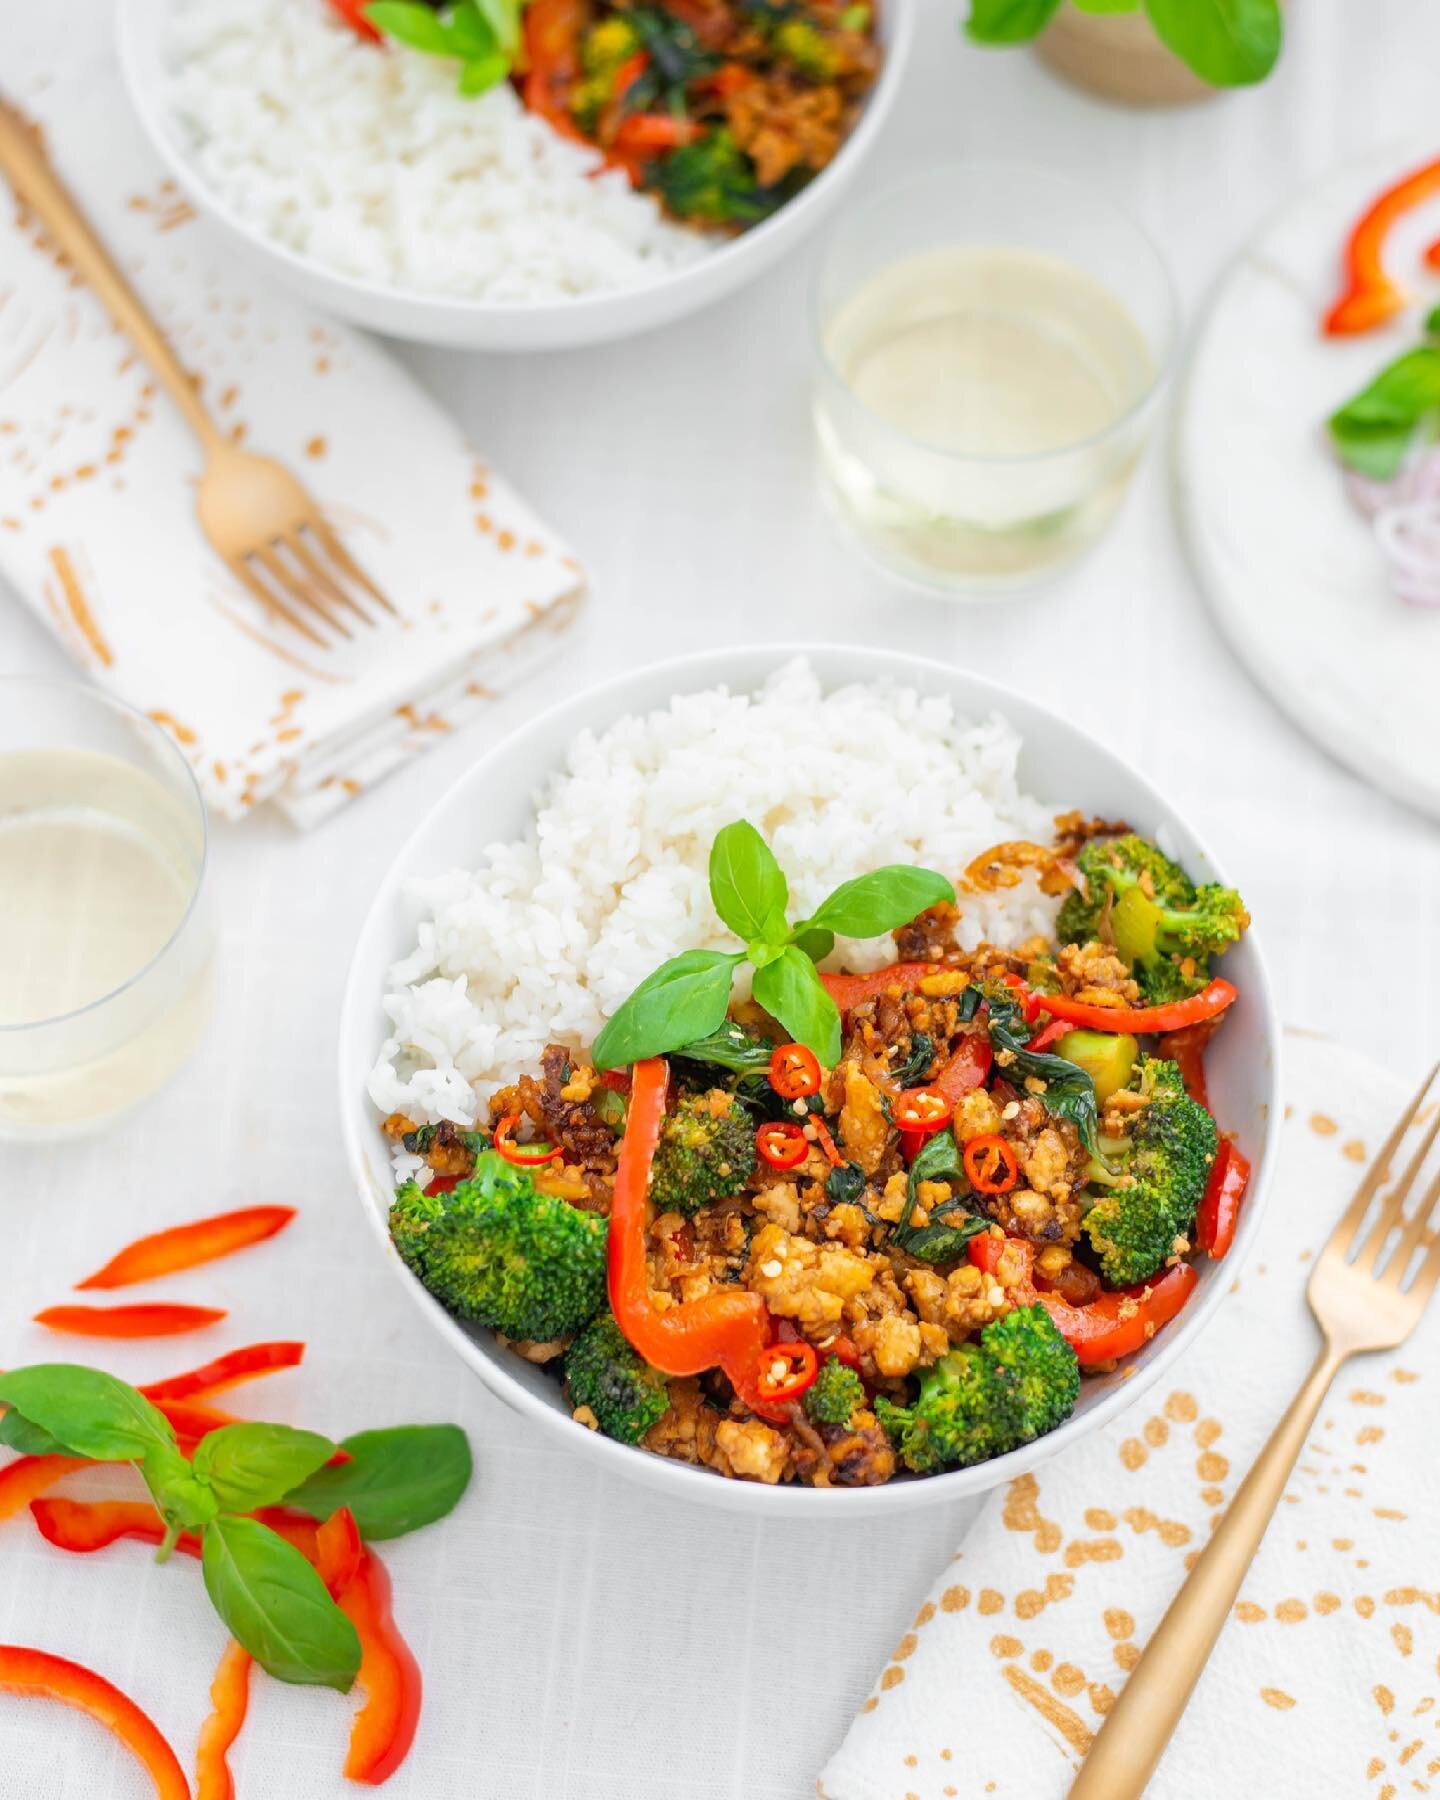 This quick and easy Thai Basil Bowl is one of my go-to weeknight meals when I&rsquo;m craving something with lots of flavor. Crispy crumbled tofu (similar to ground chicken), a mix of veggies, and fresh basil are tossed in a delicious sauce full of T